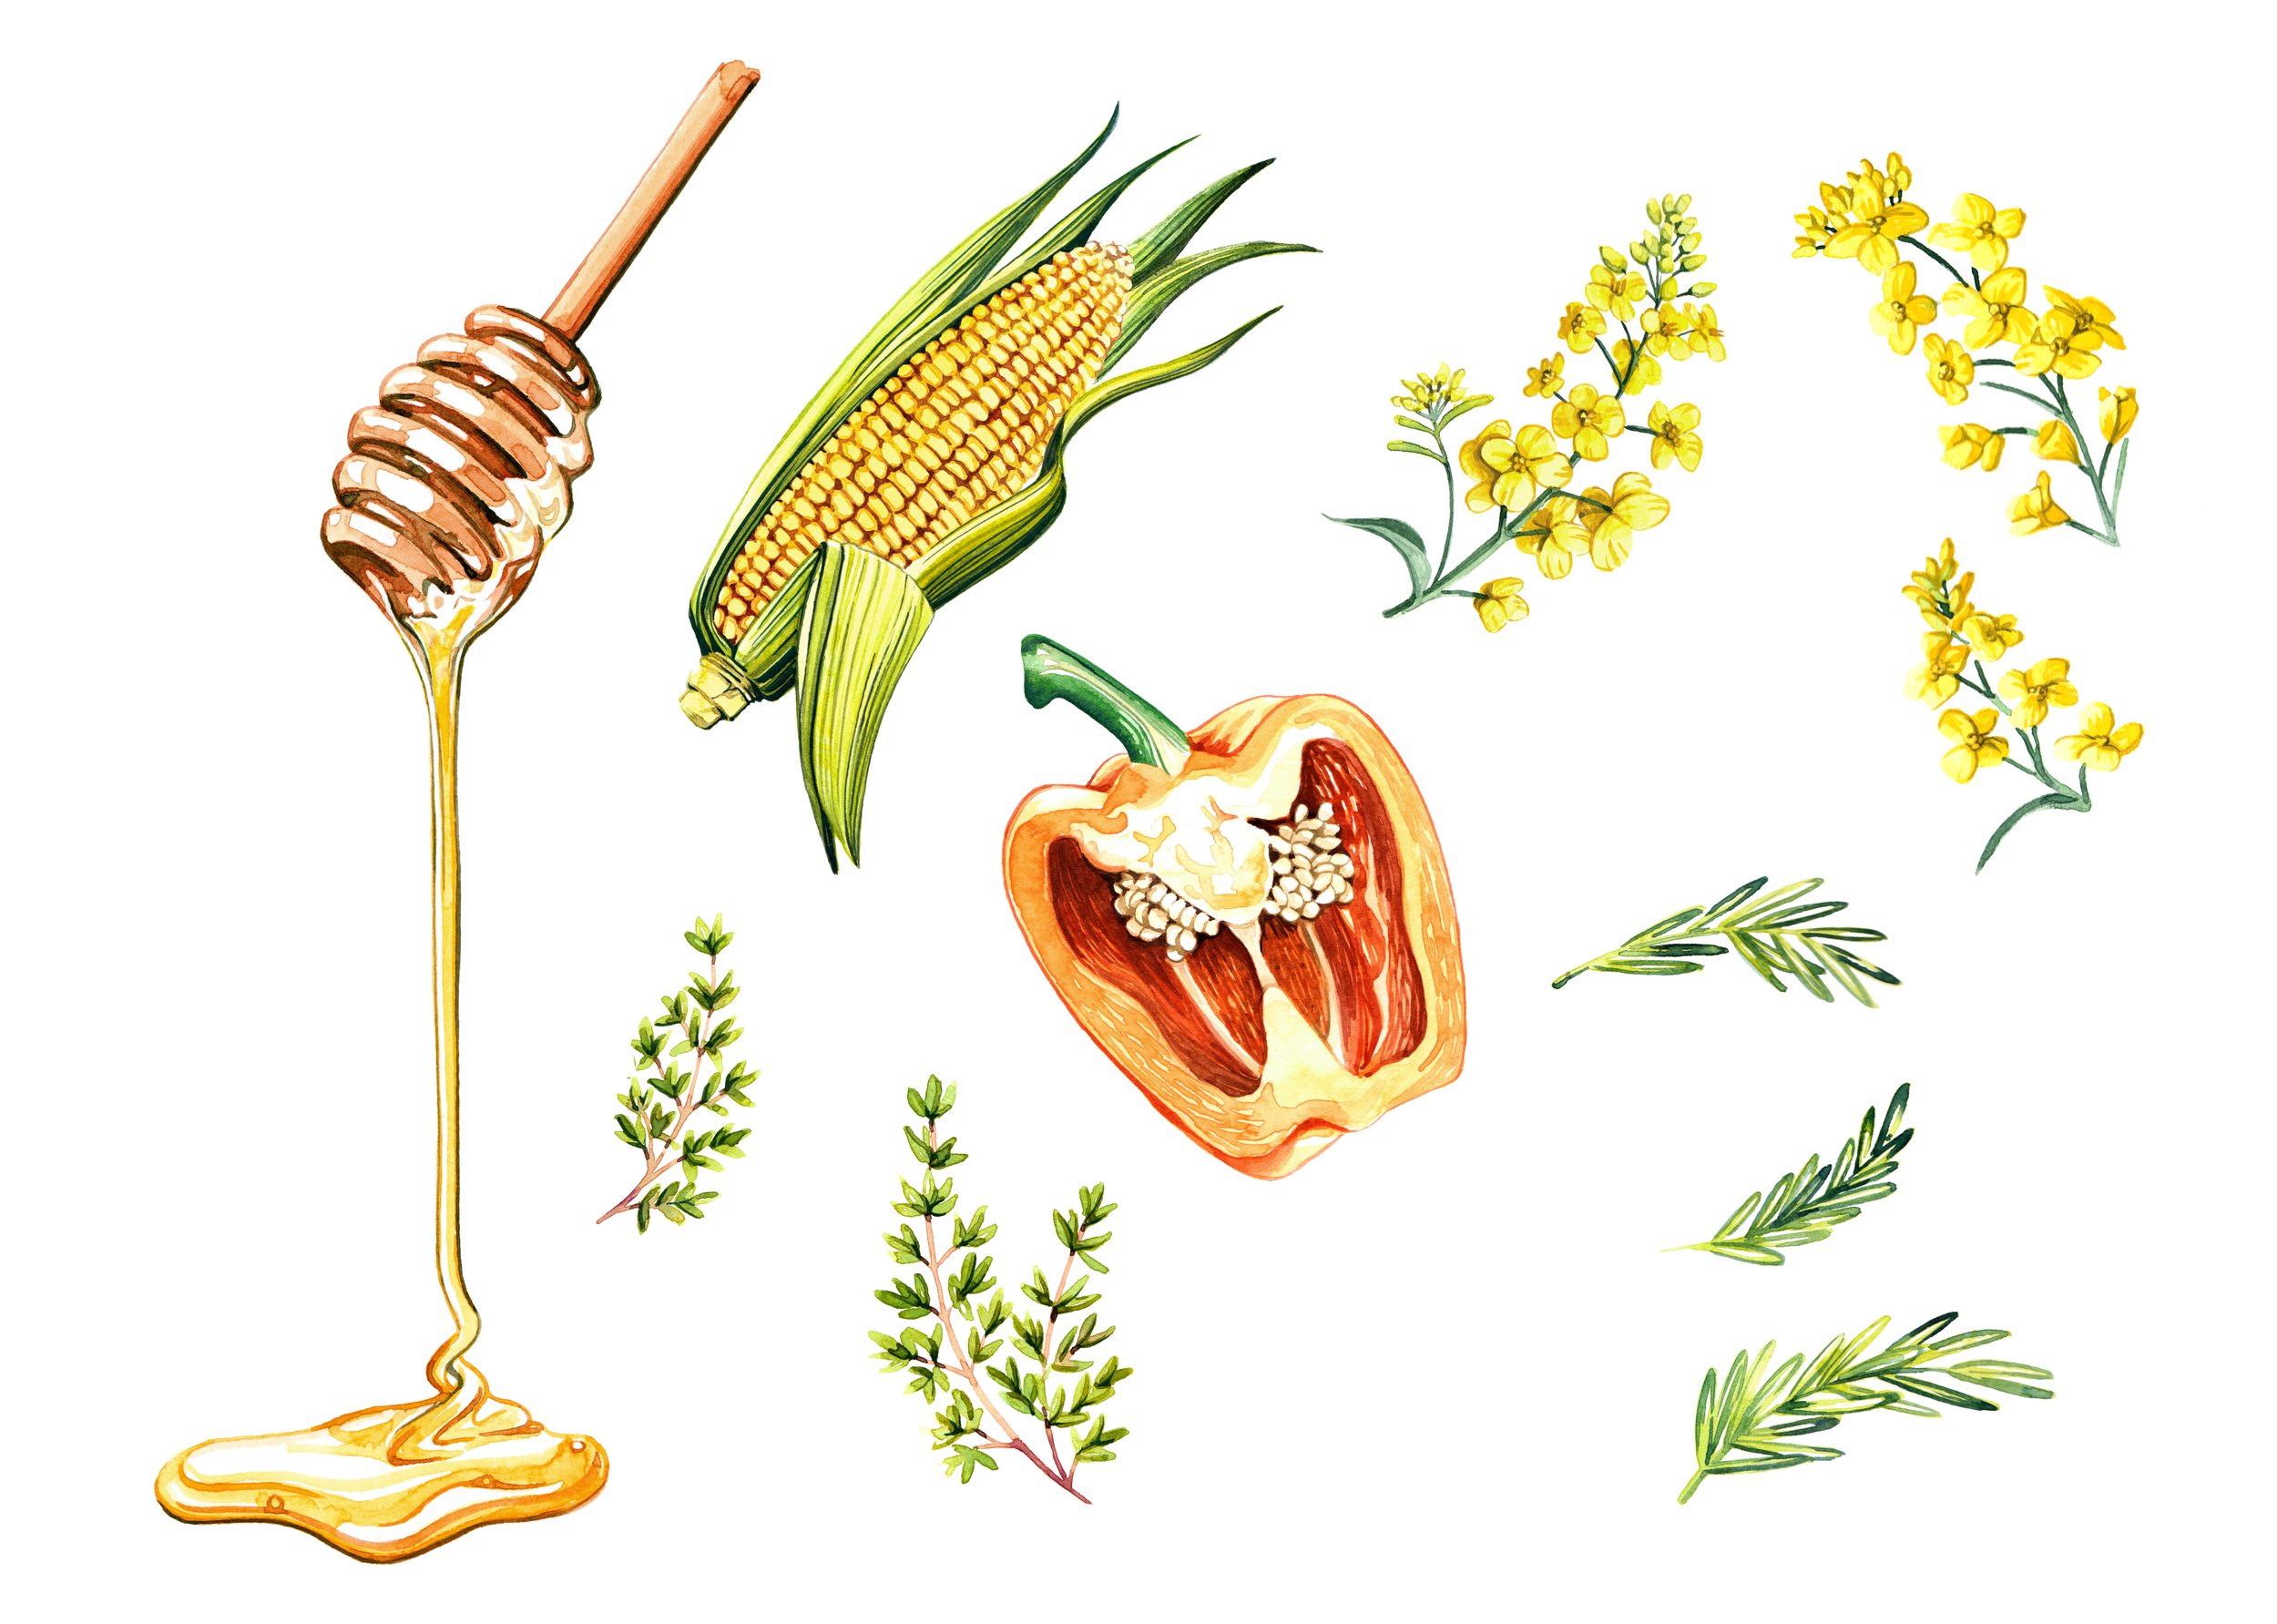 watercolour assets for food ingredients animation by illustrator Willa Gebbie